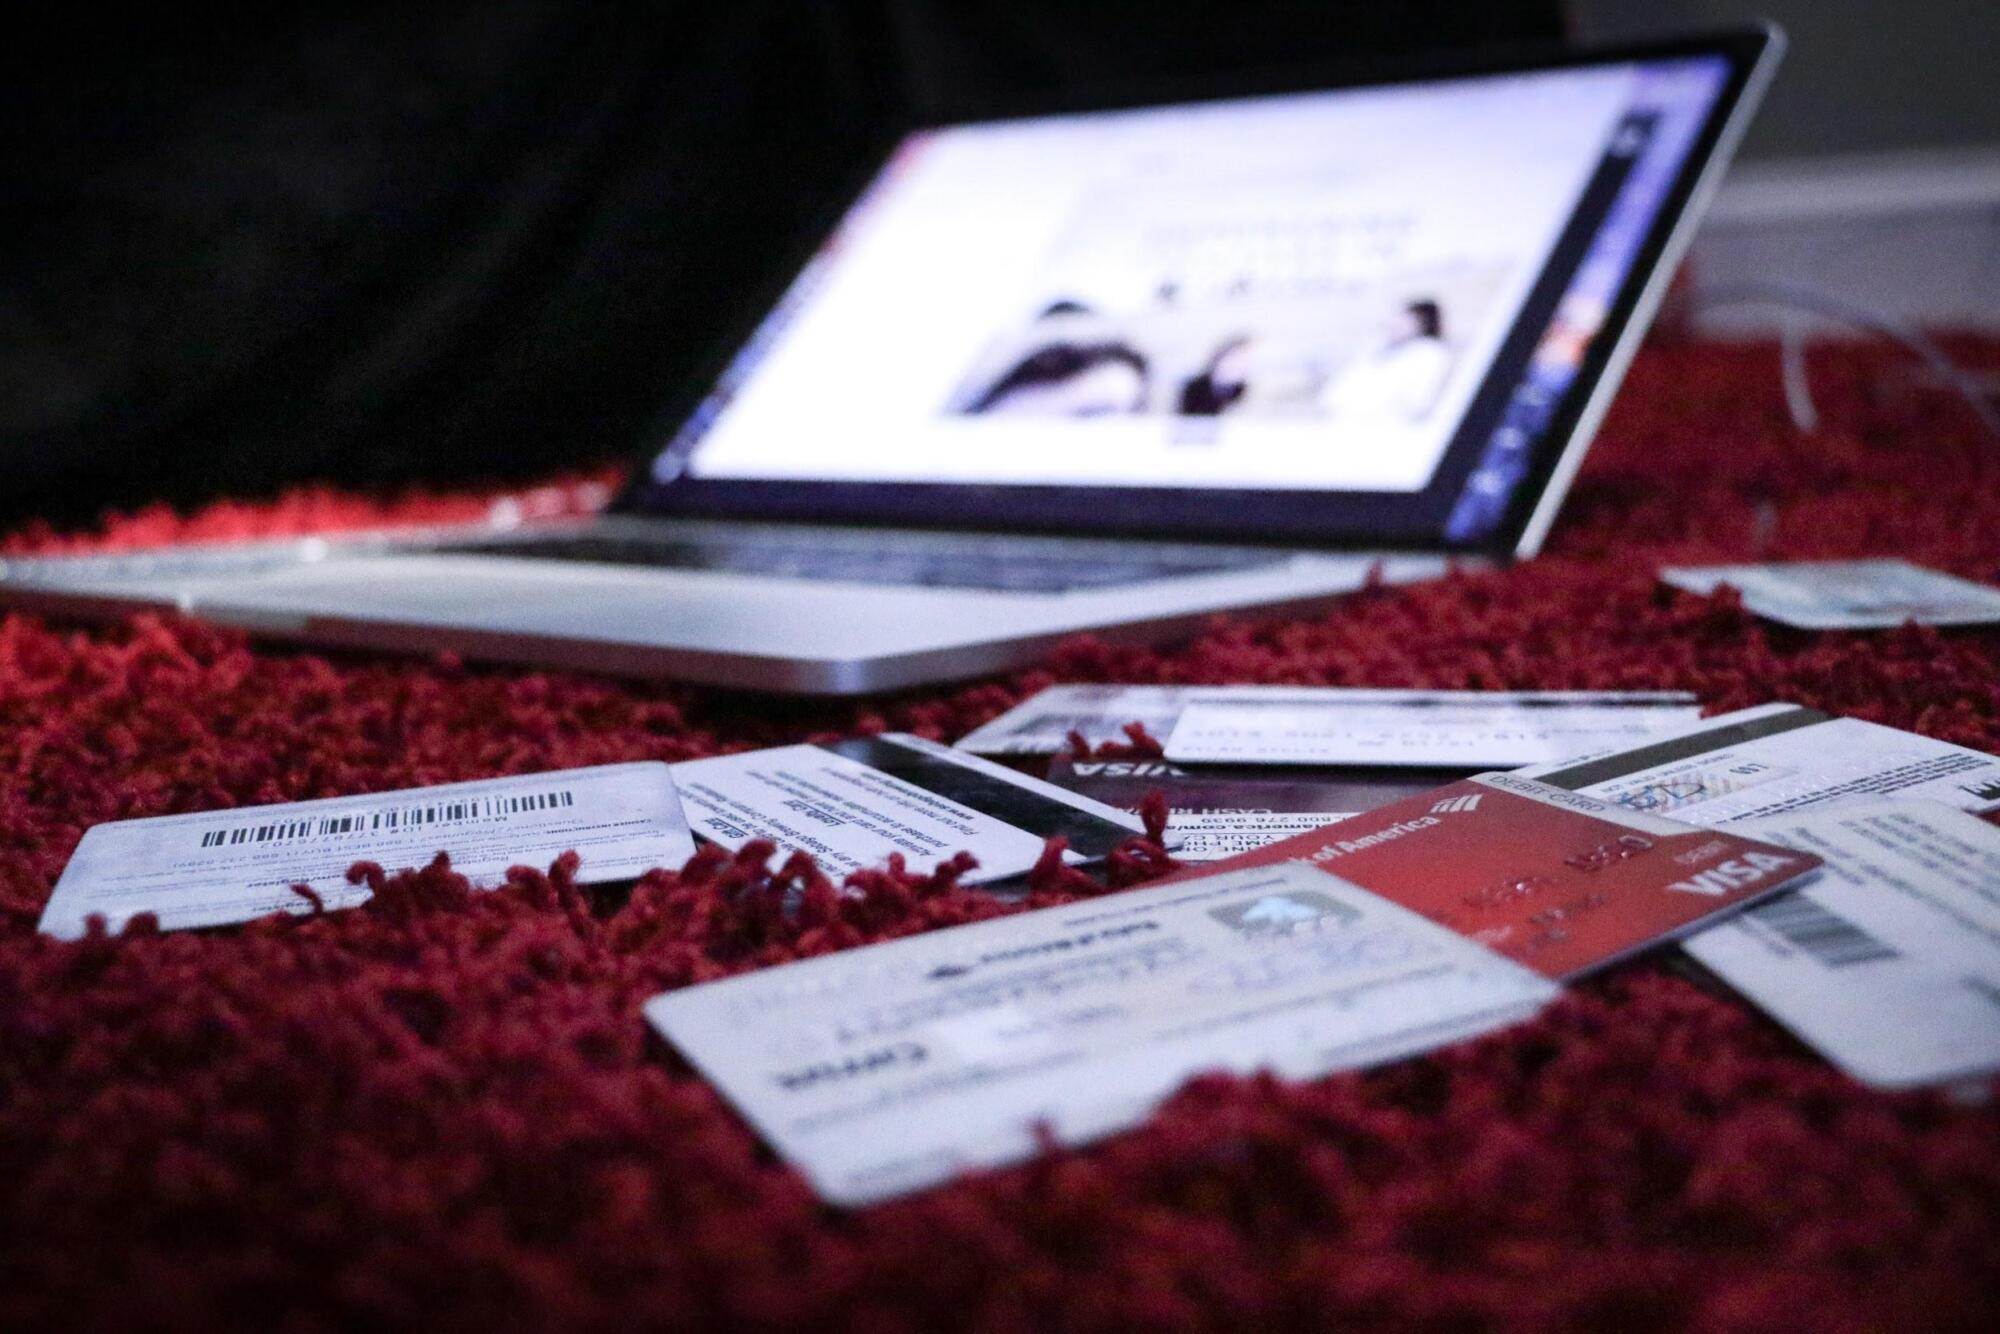 A laptop is sitting on a carpet with tickets on it, providing helpful guidance for renting an apartment with troubled credit.